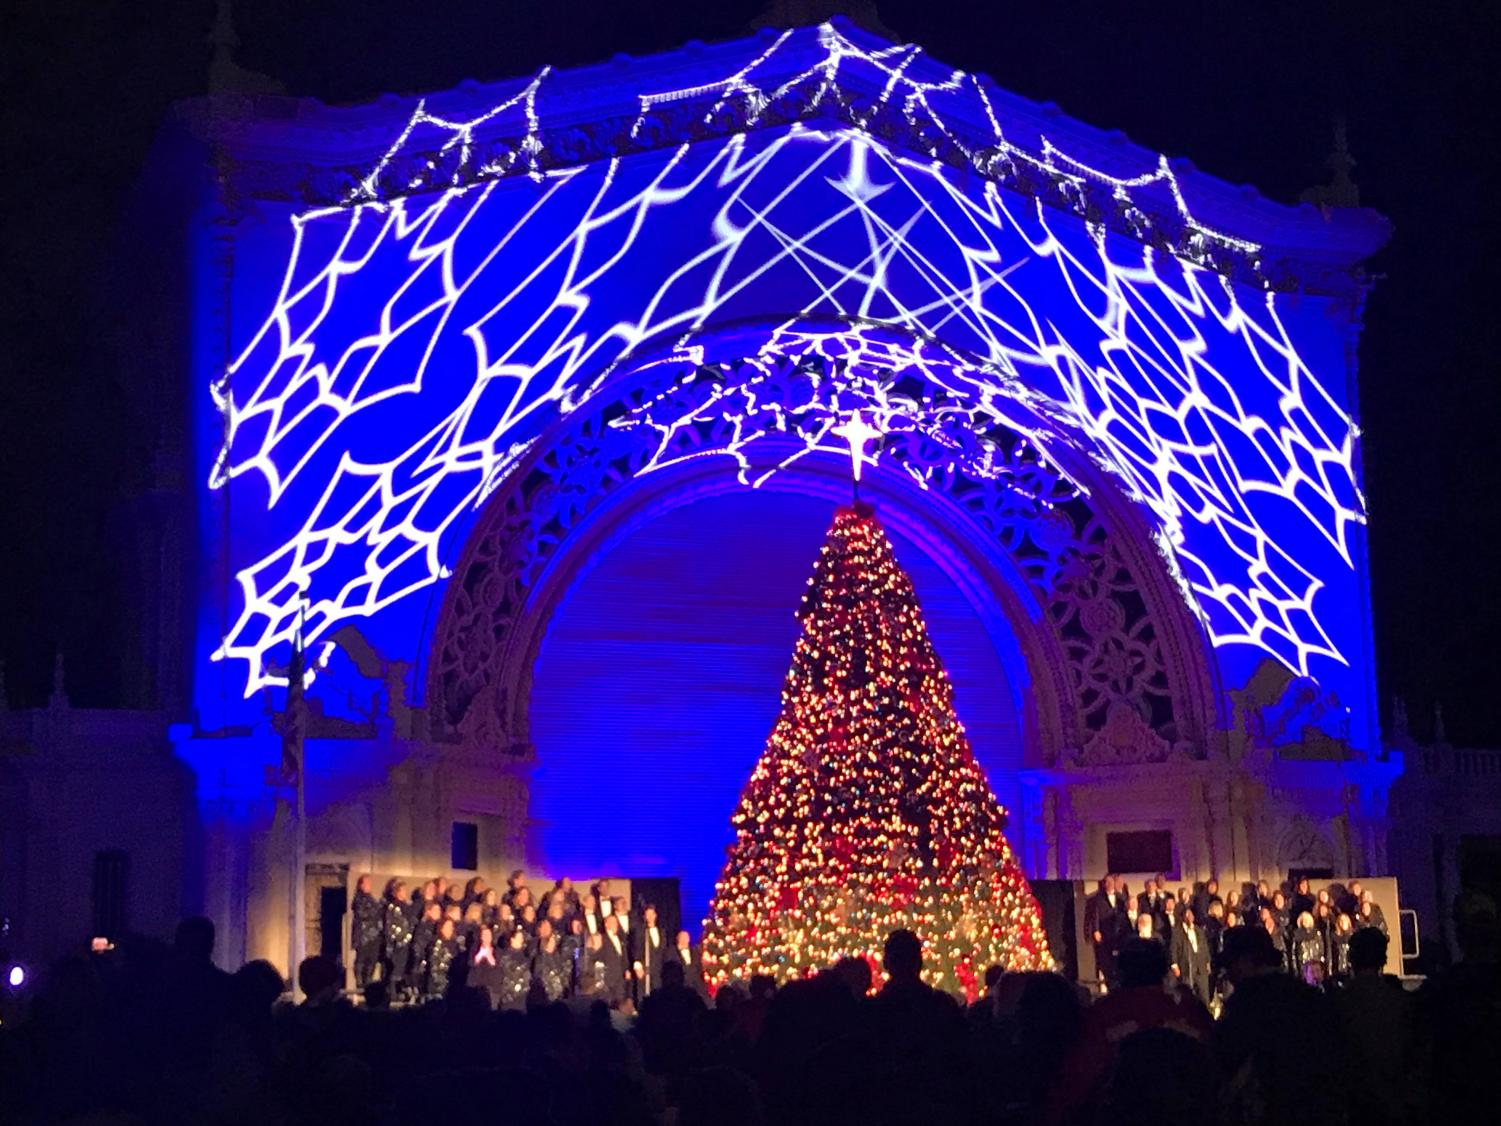 December Nights lights up Balboa Park’s sky again The Daily Aztec